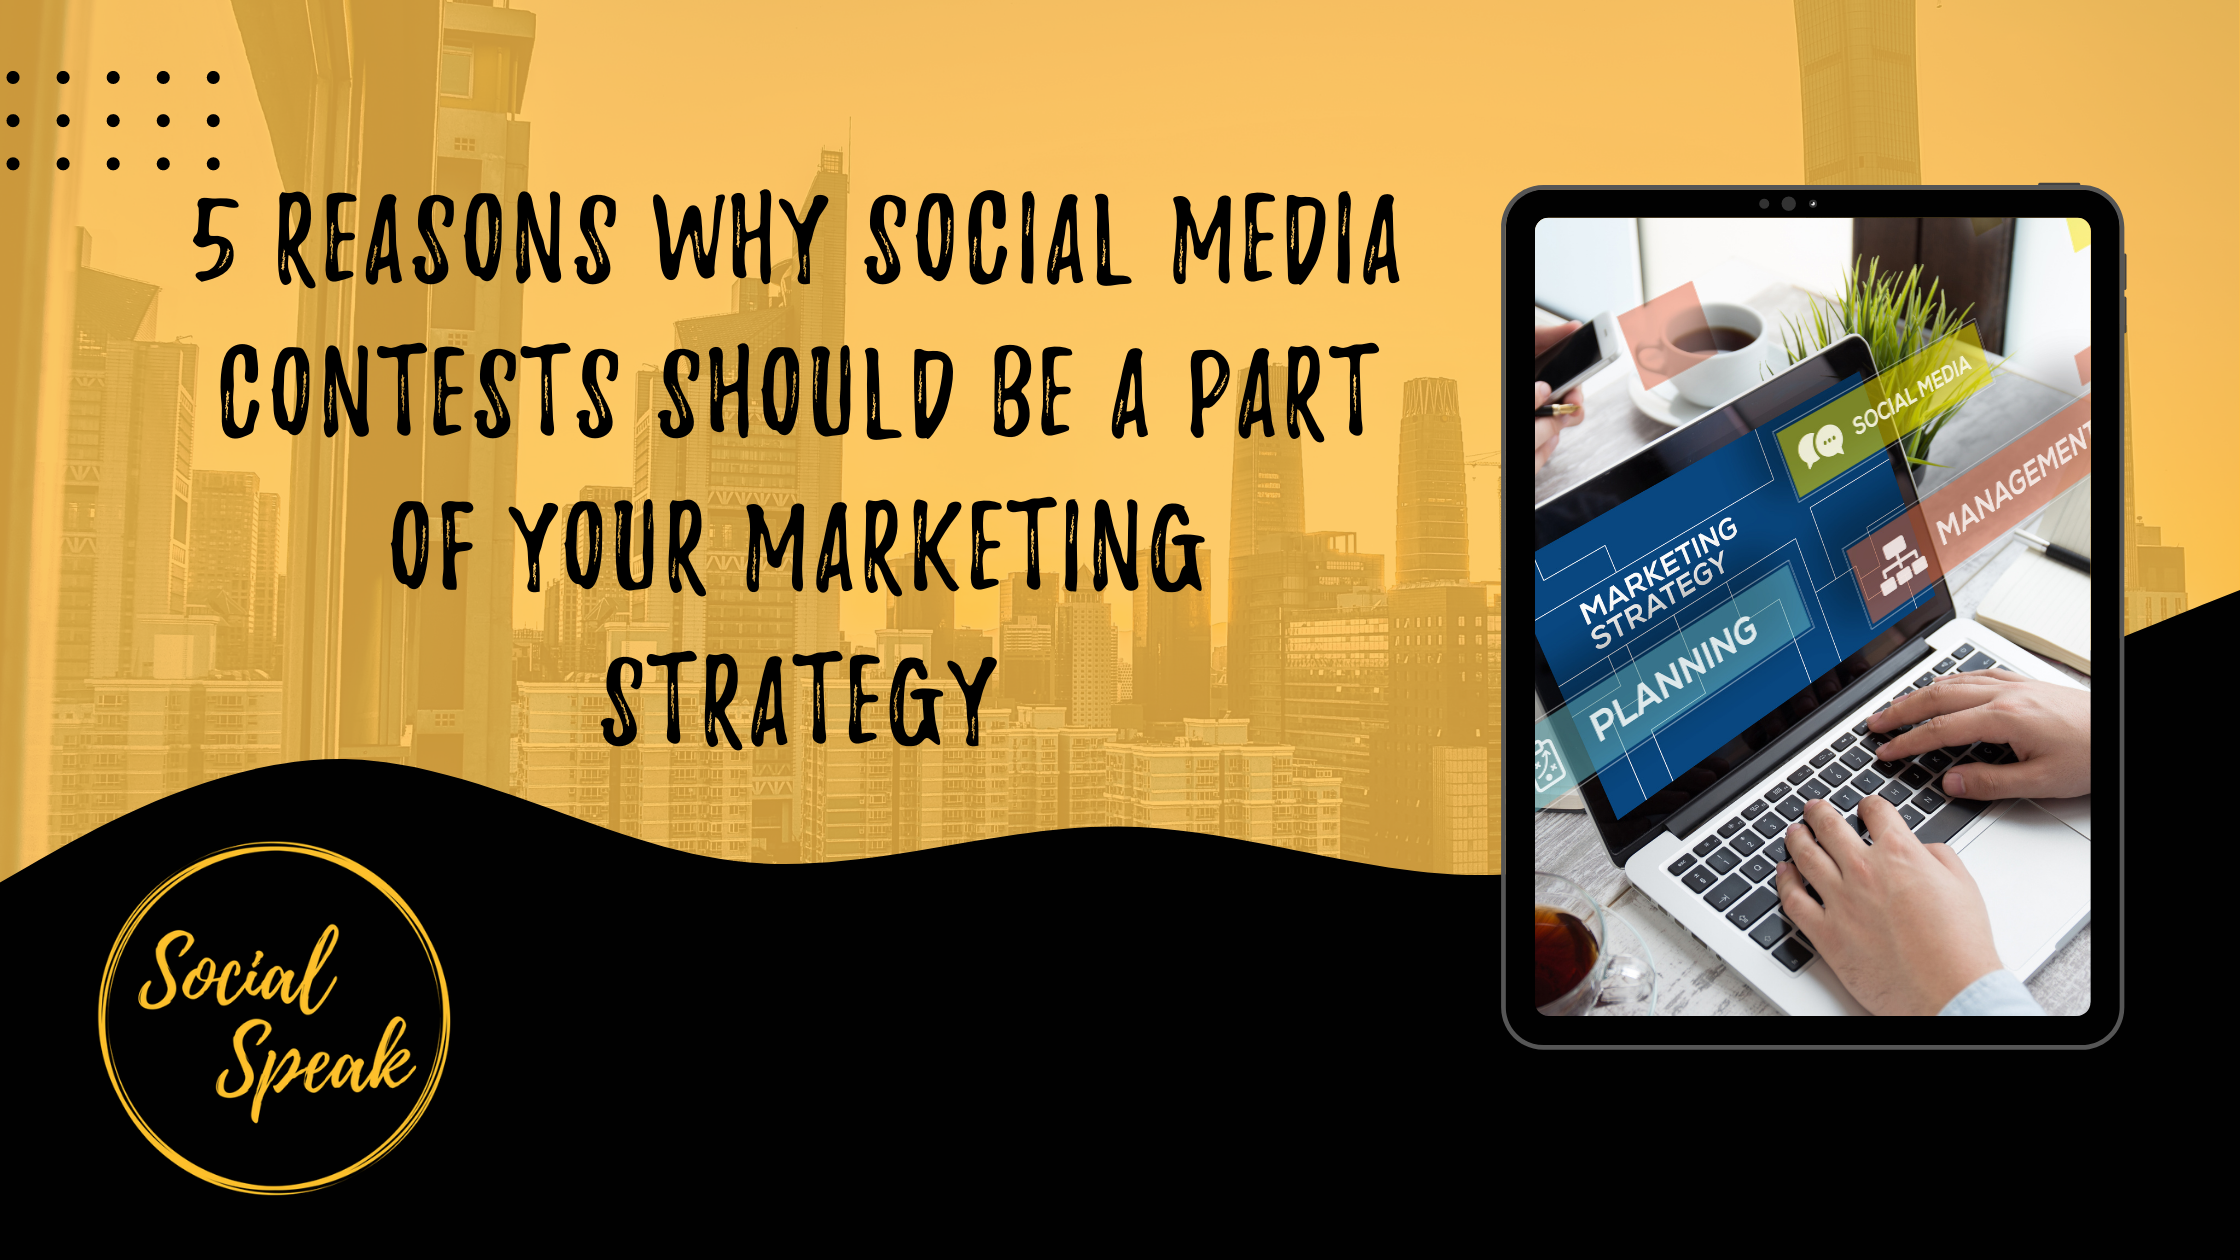 5-Reasons-Why-Social-Media-Contests-Should-be-a-Part-of-Your-Marketing-Strategy.png